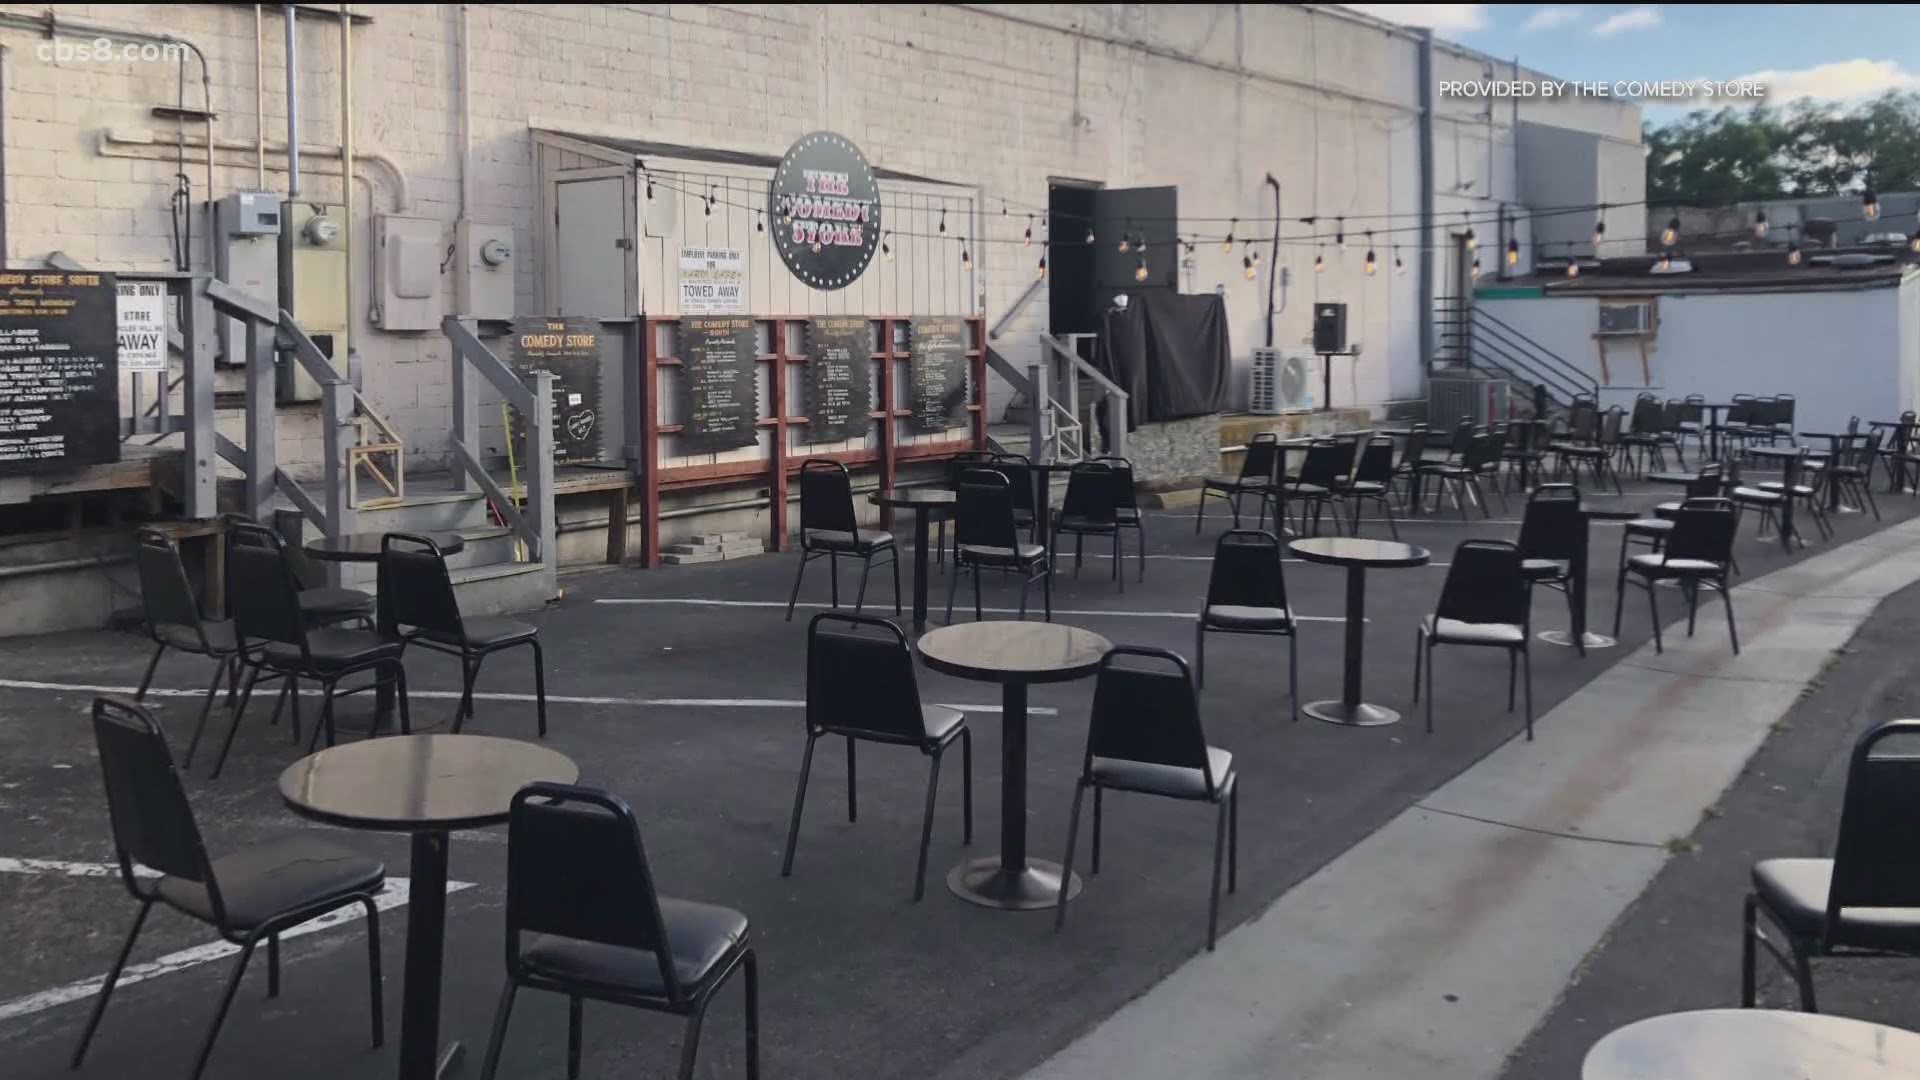 Two San Diego comedy clubs ordered to close despite operating outdoors